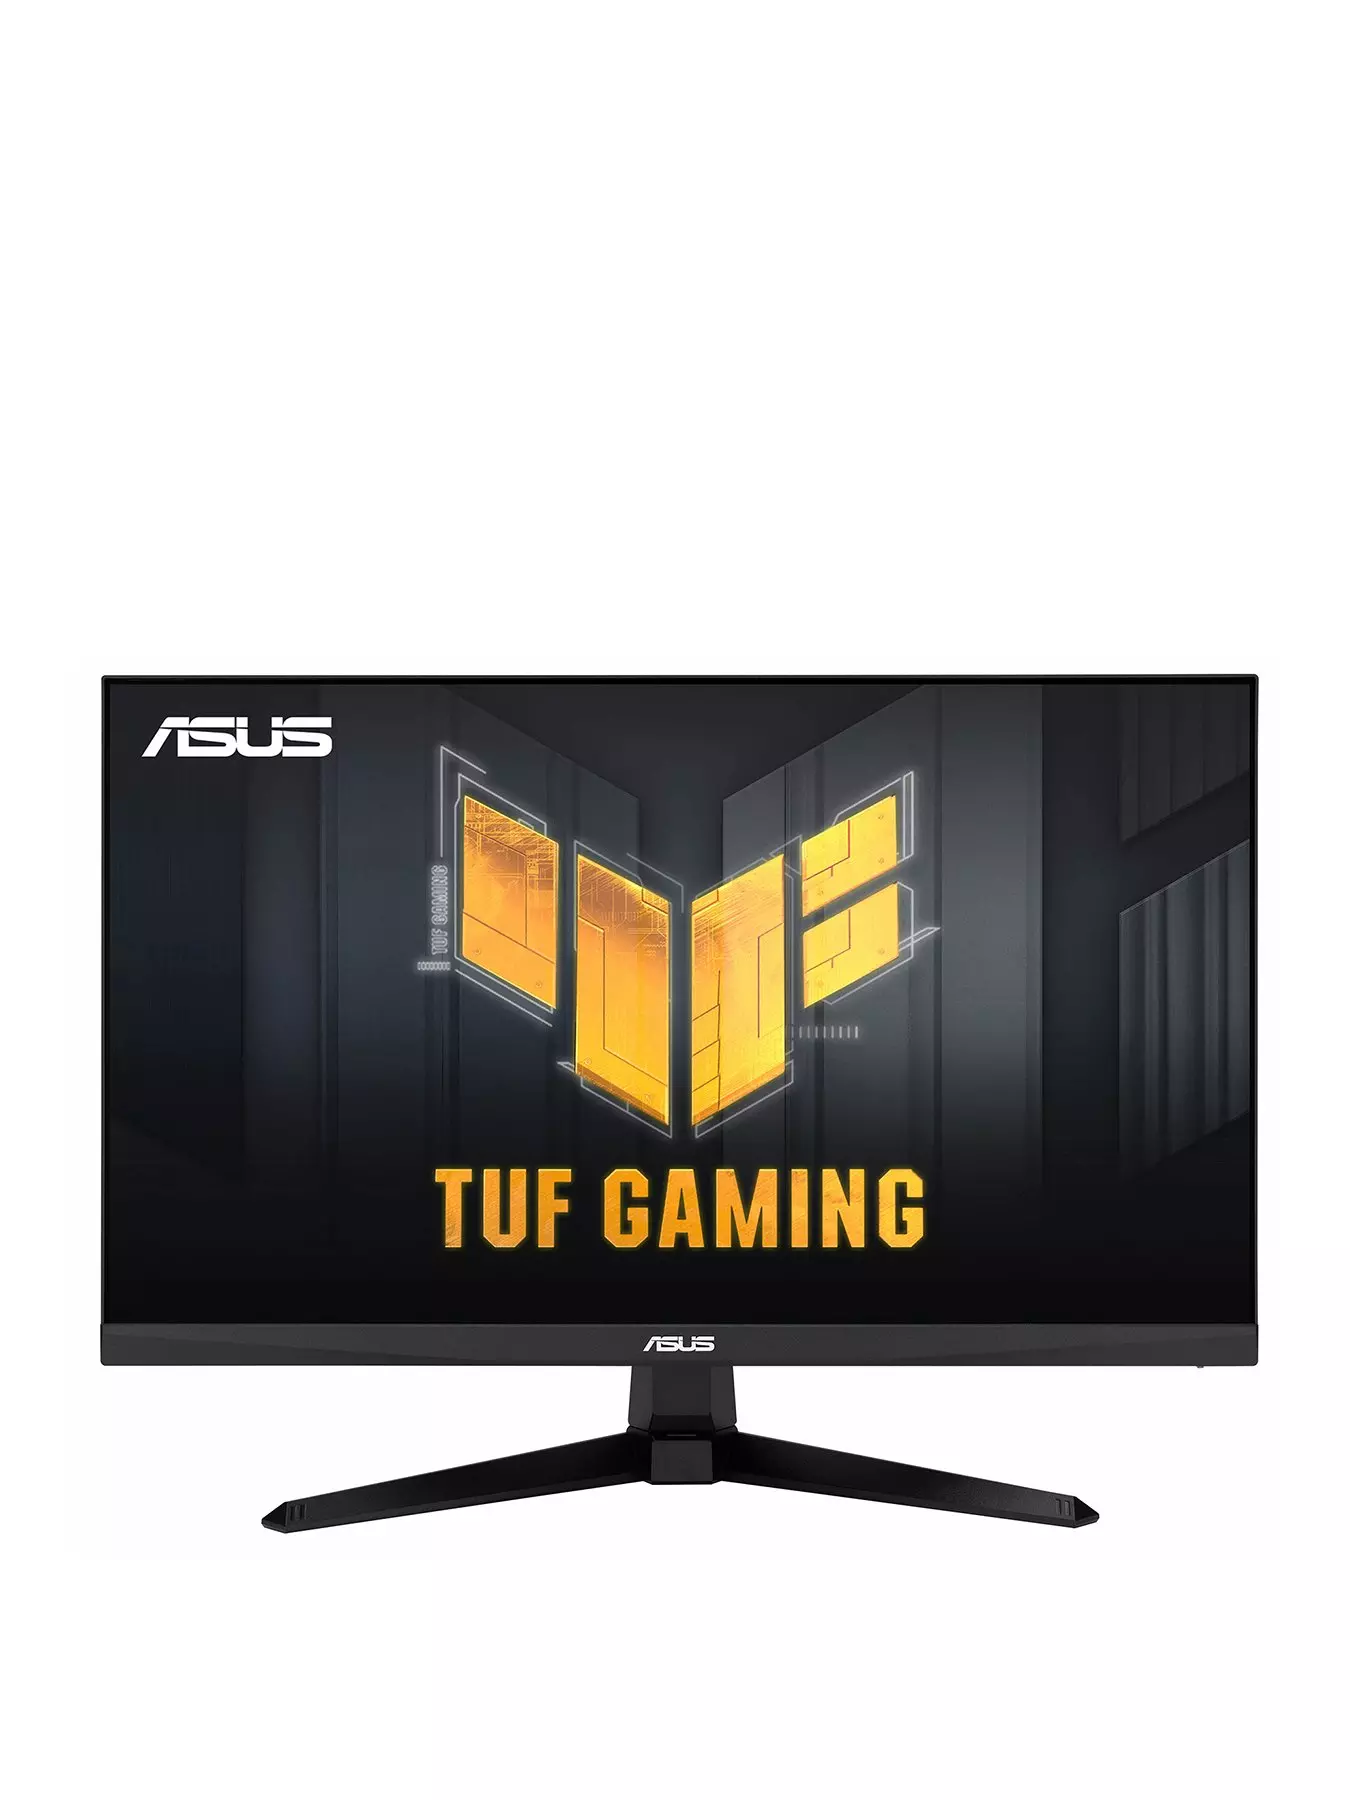 24in Ips Monitor32-inch 2k 100hz Ips Gaming Monitor - Hdr, 1ms Response,  Wide Viewing Angle